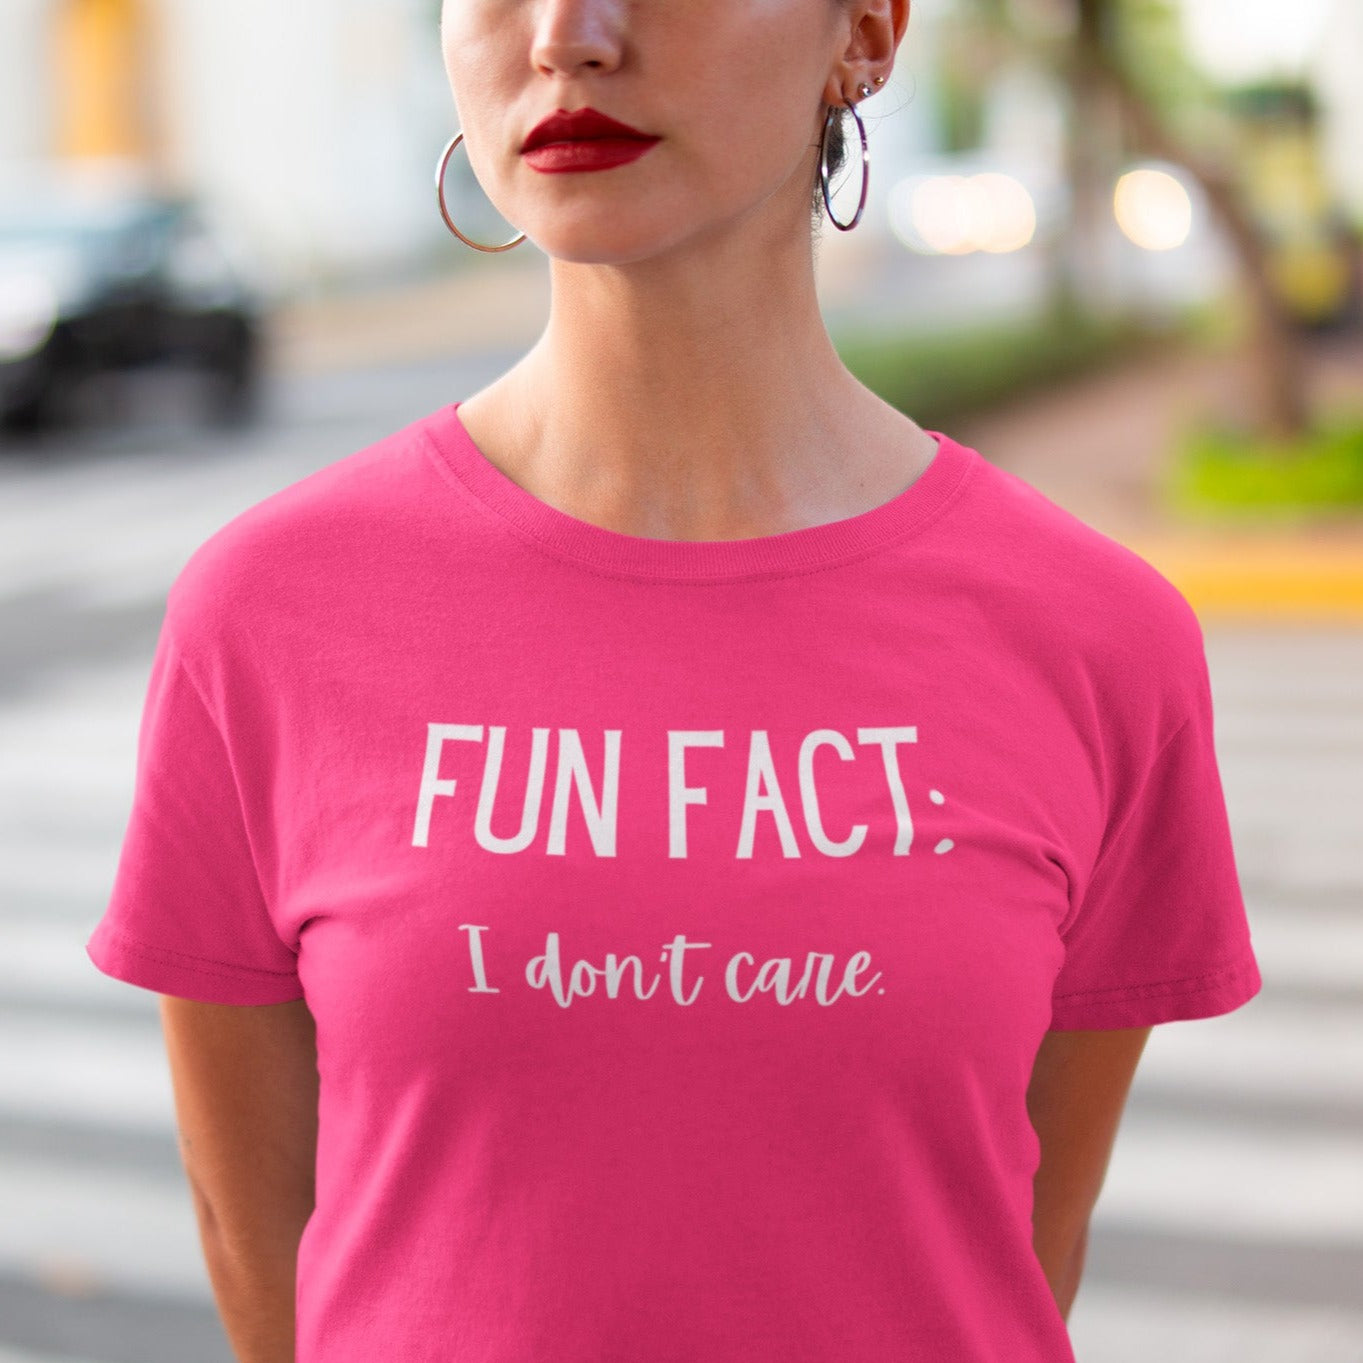 fun-fact-i-dont-care-funny-berry-t-shirt-womens-sarcastic-mockup-of-a-woman-on-the-street